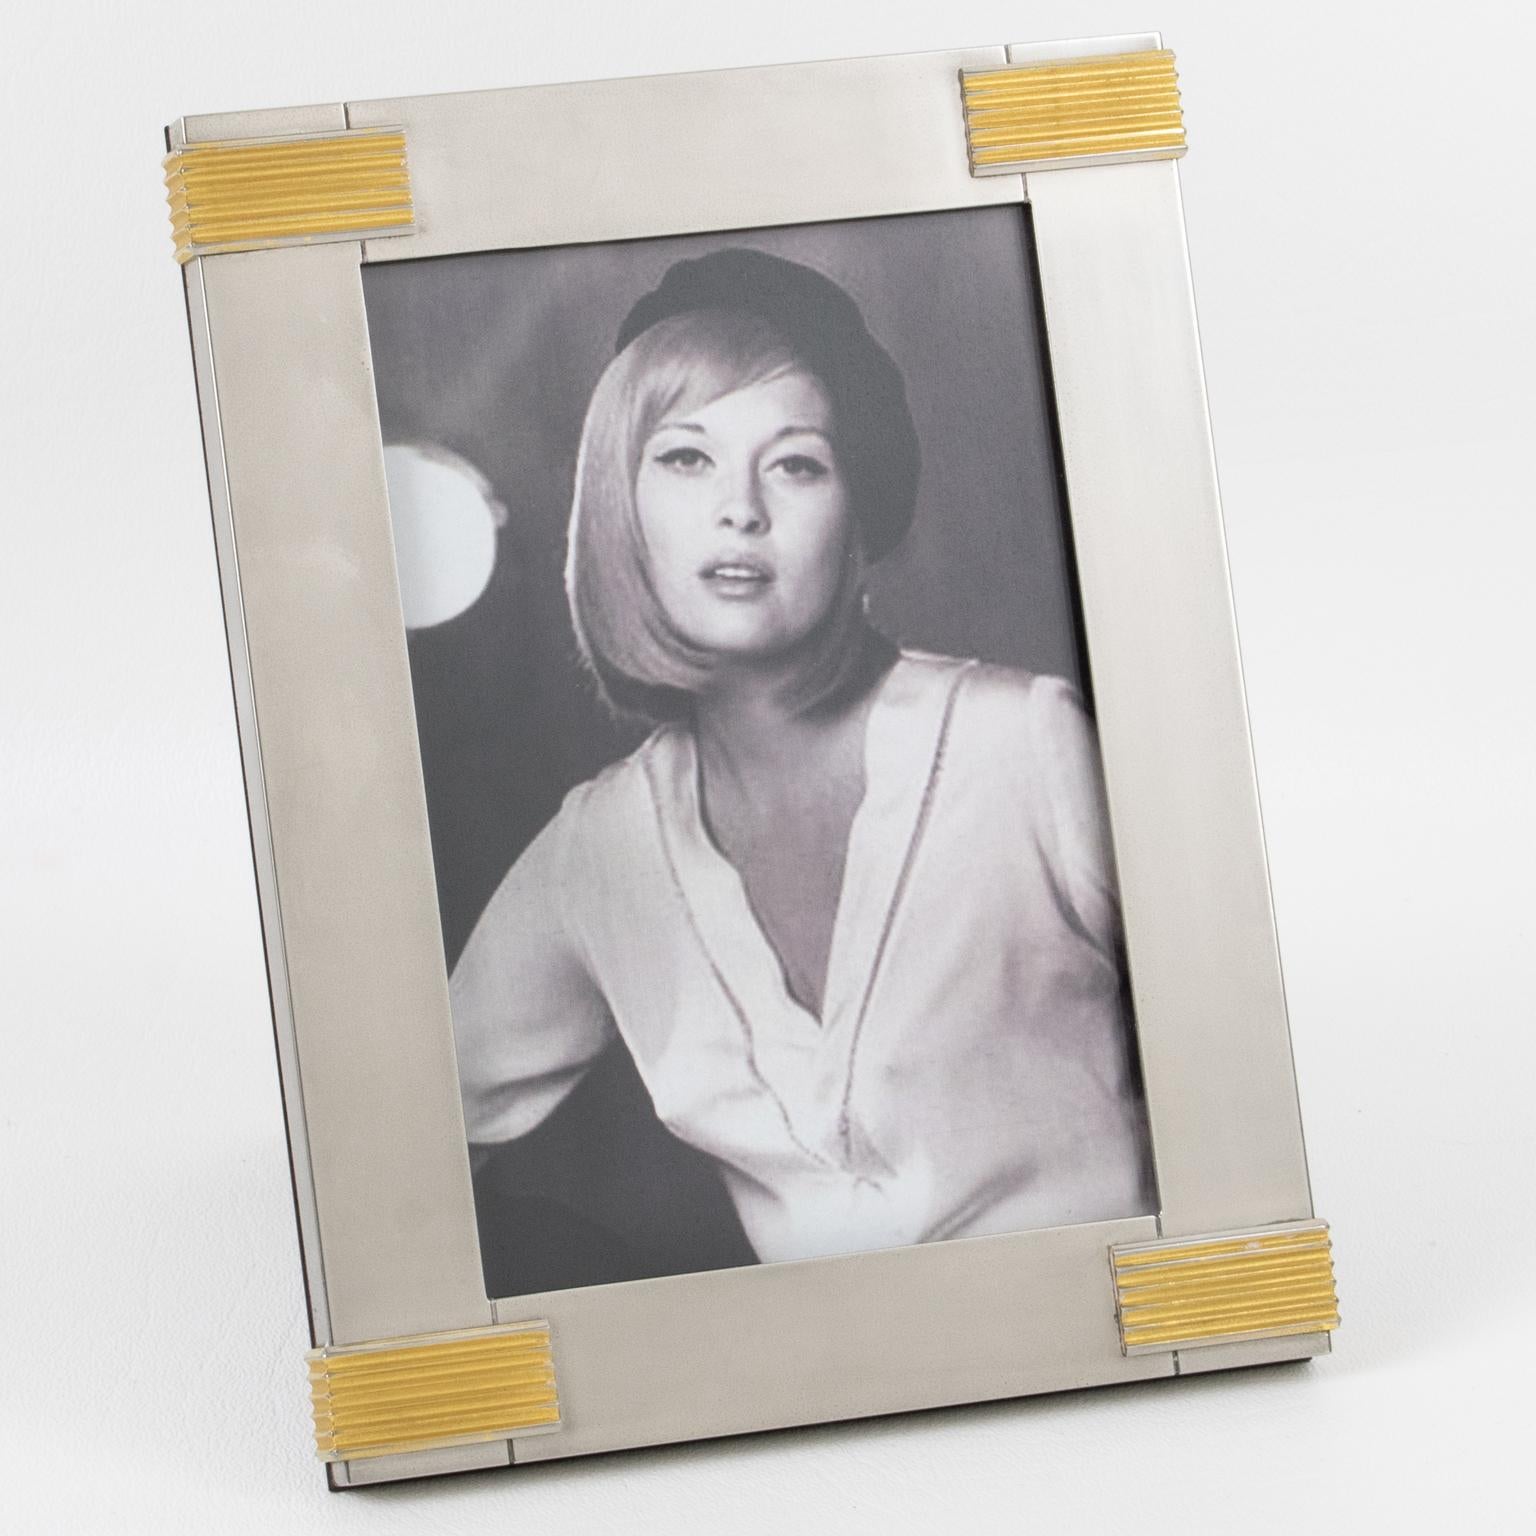 Italian designer Gucci crafted this elegantly classic and iconic picture photo frame in the 1980s. The piece boasts a timeless and minimalist chromed metal and brass geometric design. The rich high gloss walnut wood back and easel have chromed metal